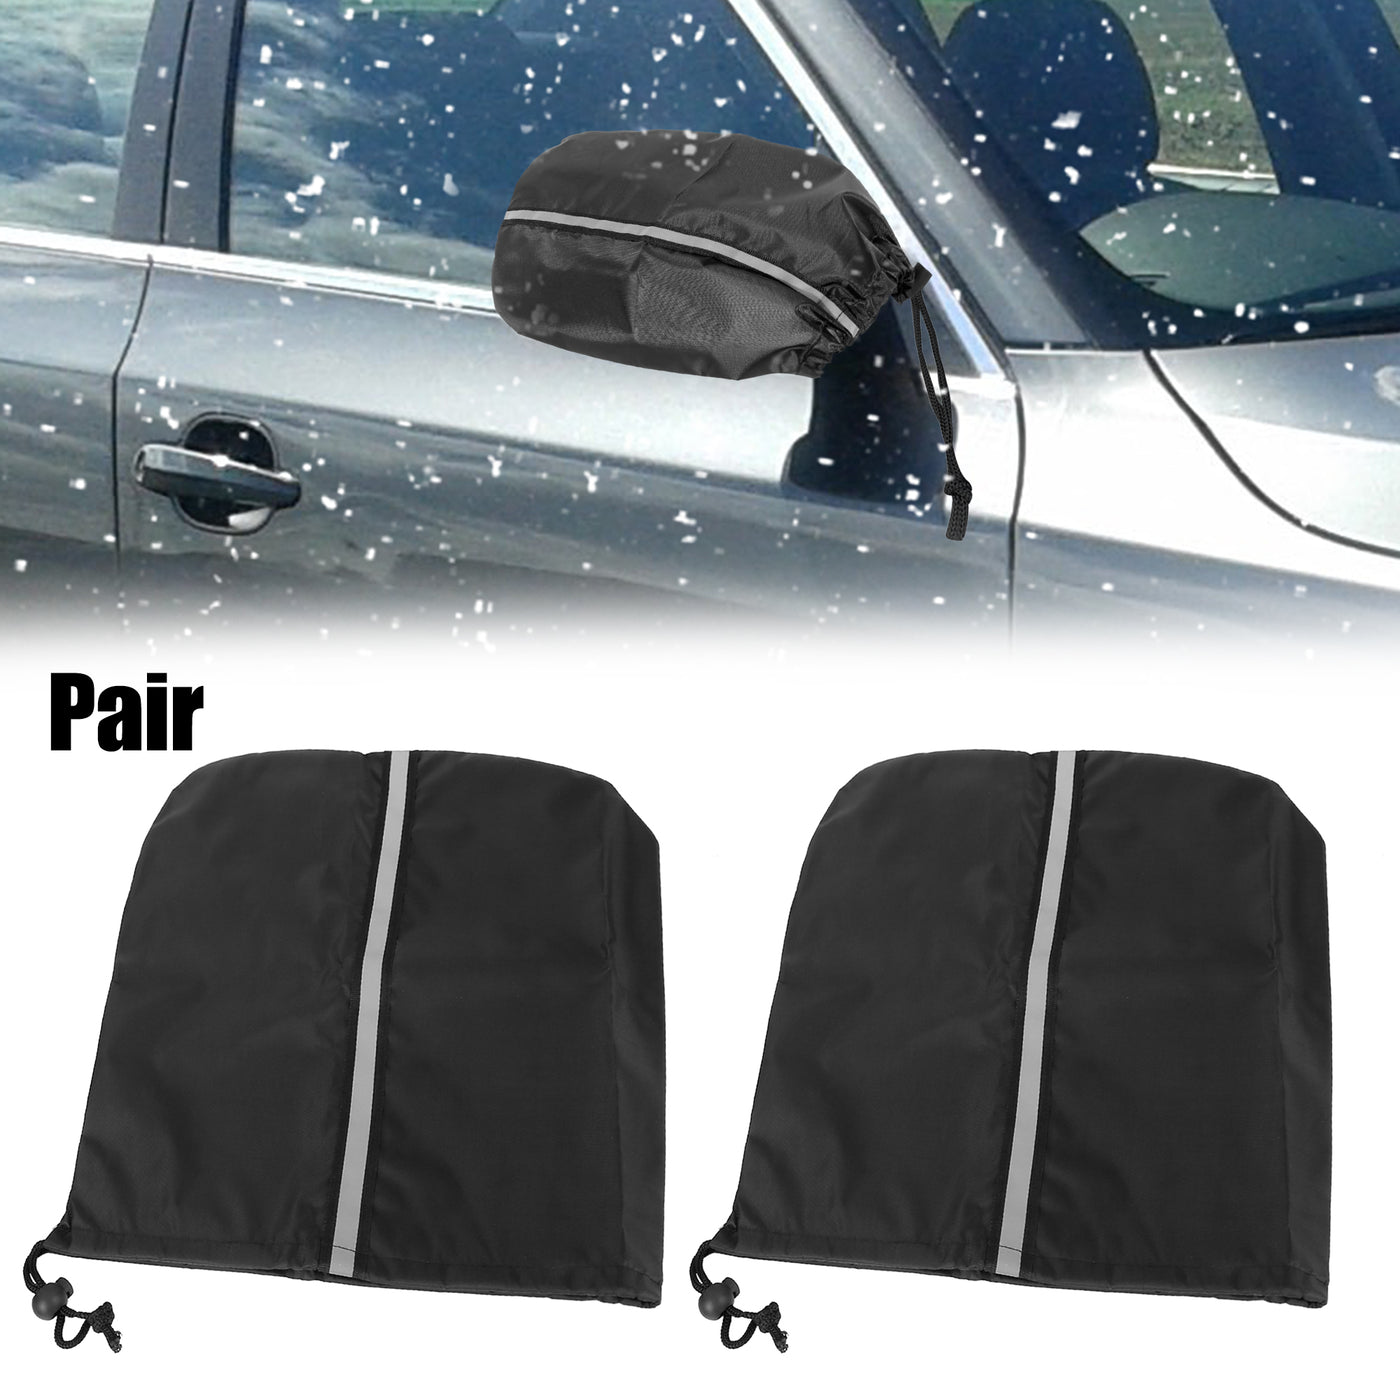 X AUTOHAUX Pair Black Rear Side View Mirror Cover Bag with Reflective Strip for Car Vehicle